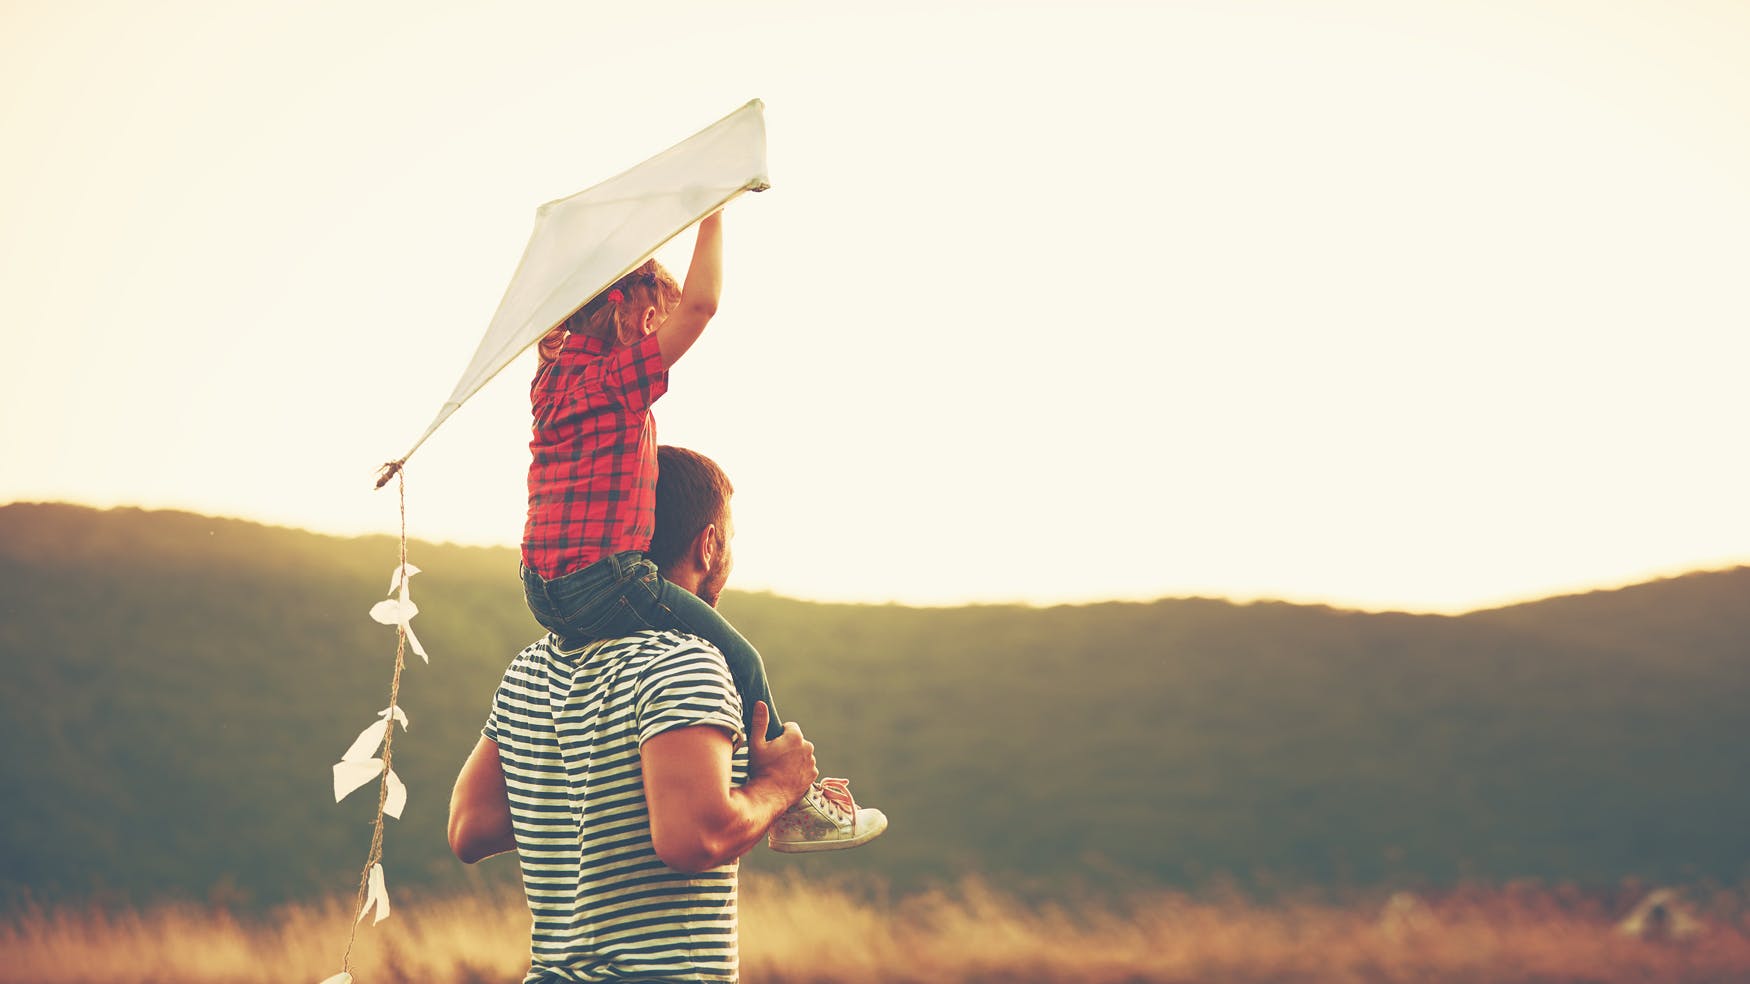 Father carries child on shoulders who is holding a kite